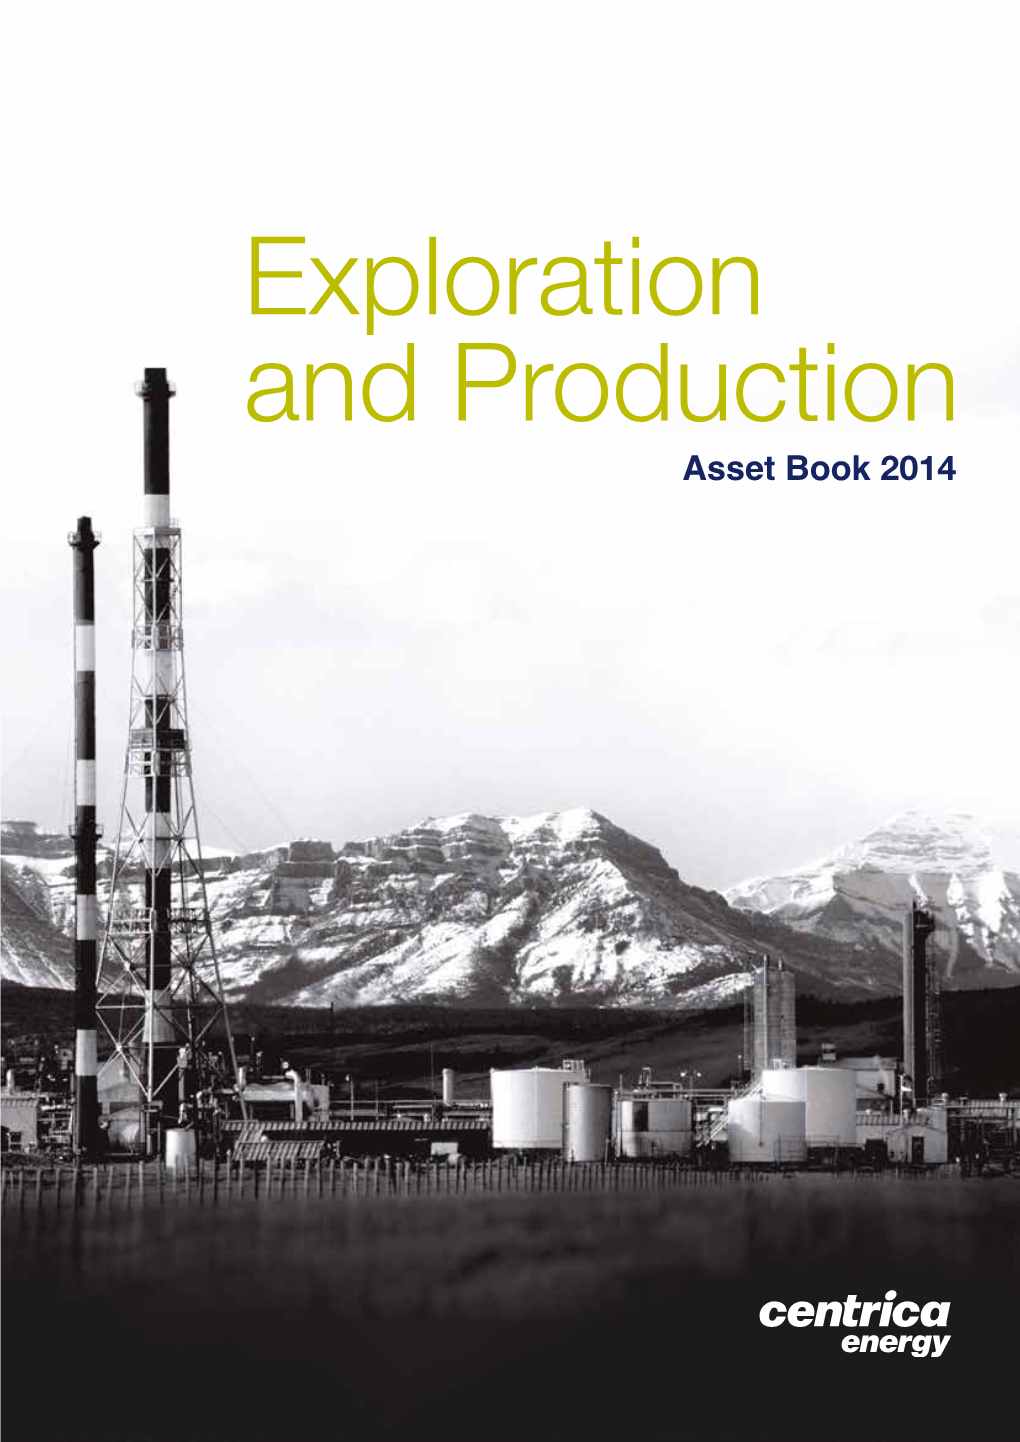 Centrica Energy, Exploration and Production Asset Book 2014